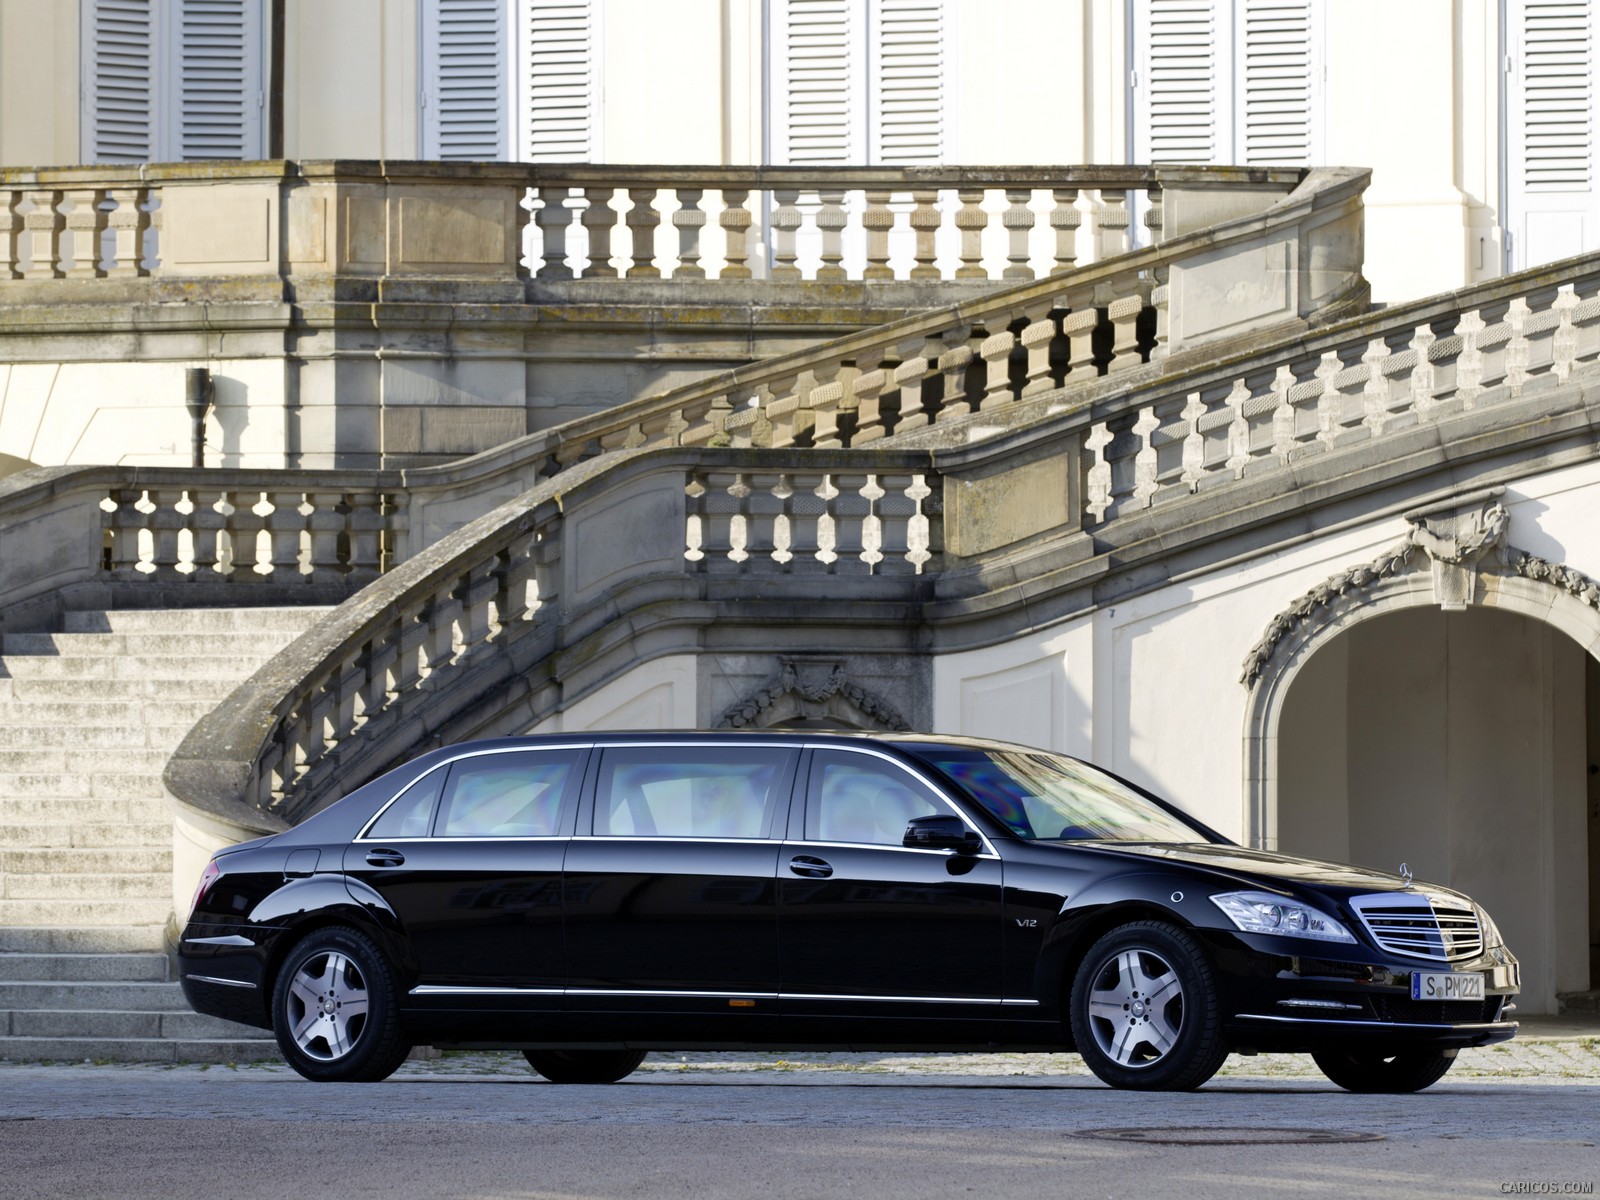 Mercedes-Benz S600 Pullman Guard  - Side, #14 of 24